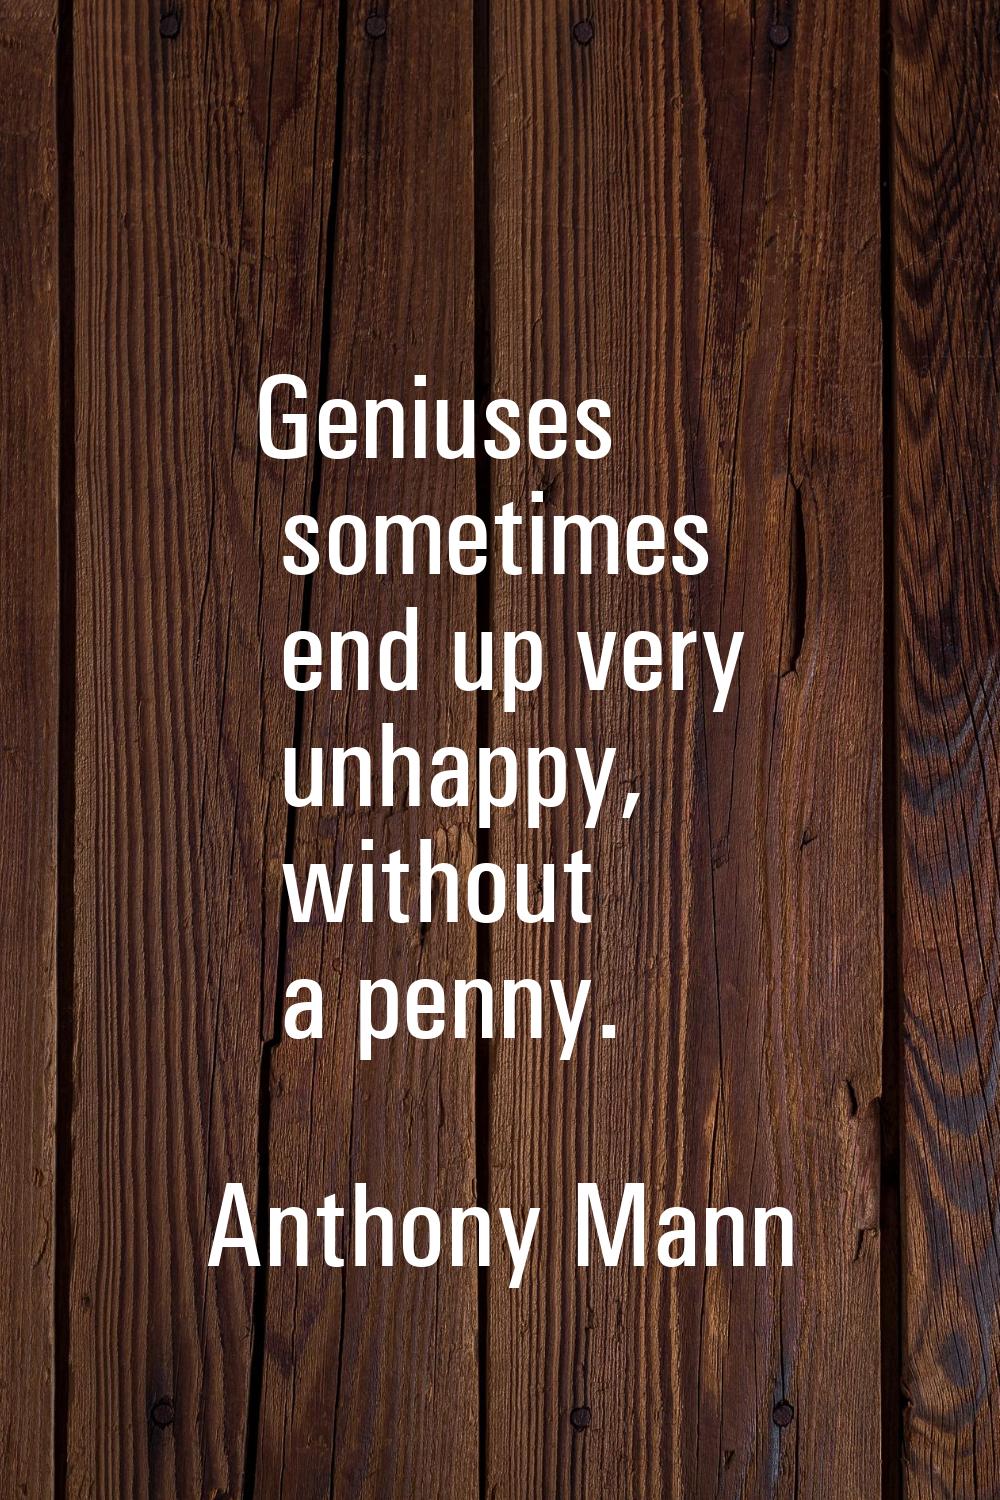 Geniuses sometimes end up very unhappy, without a penny.